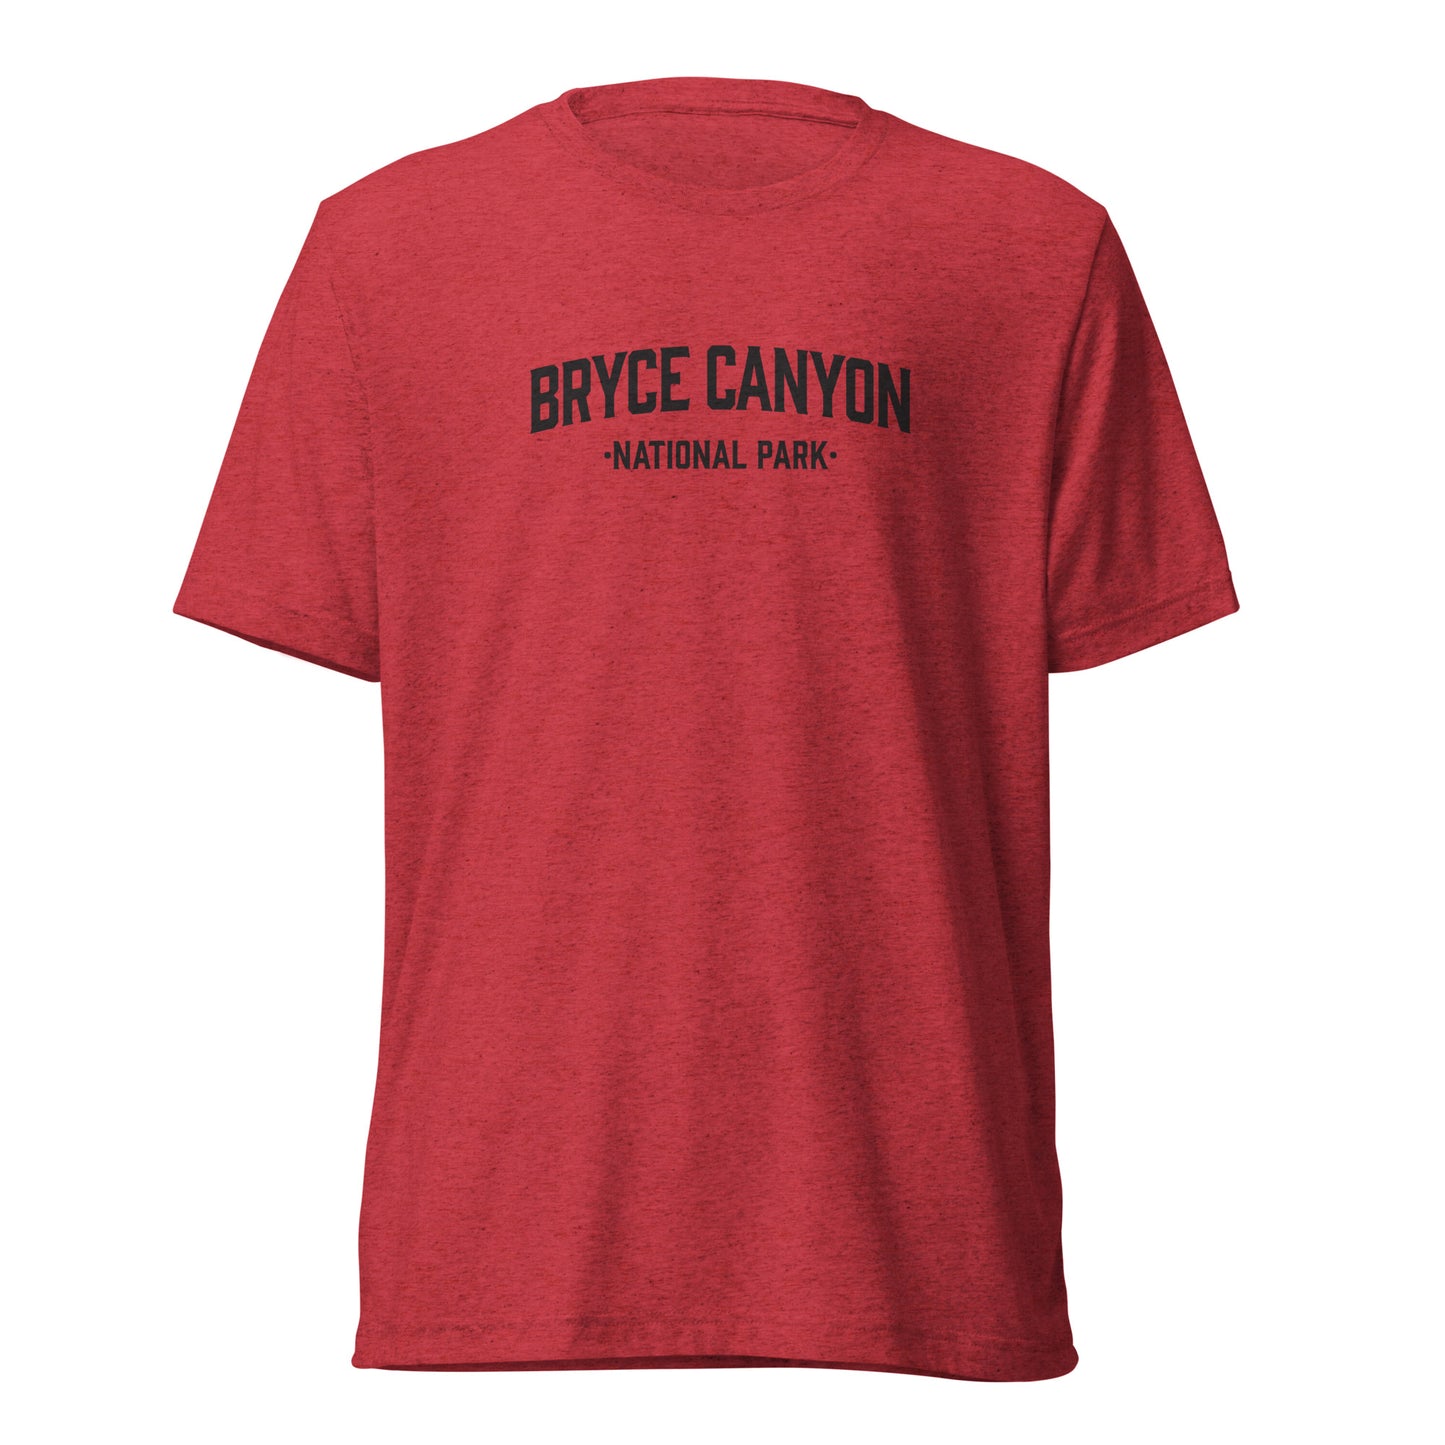 Premium Everyday Bryce Canyon National Park Tee